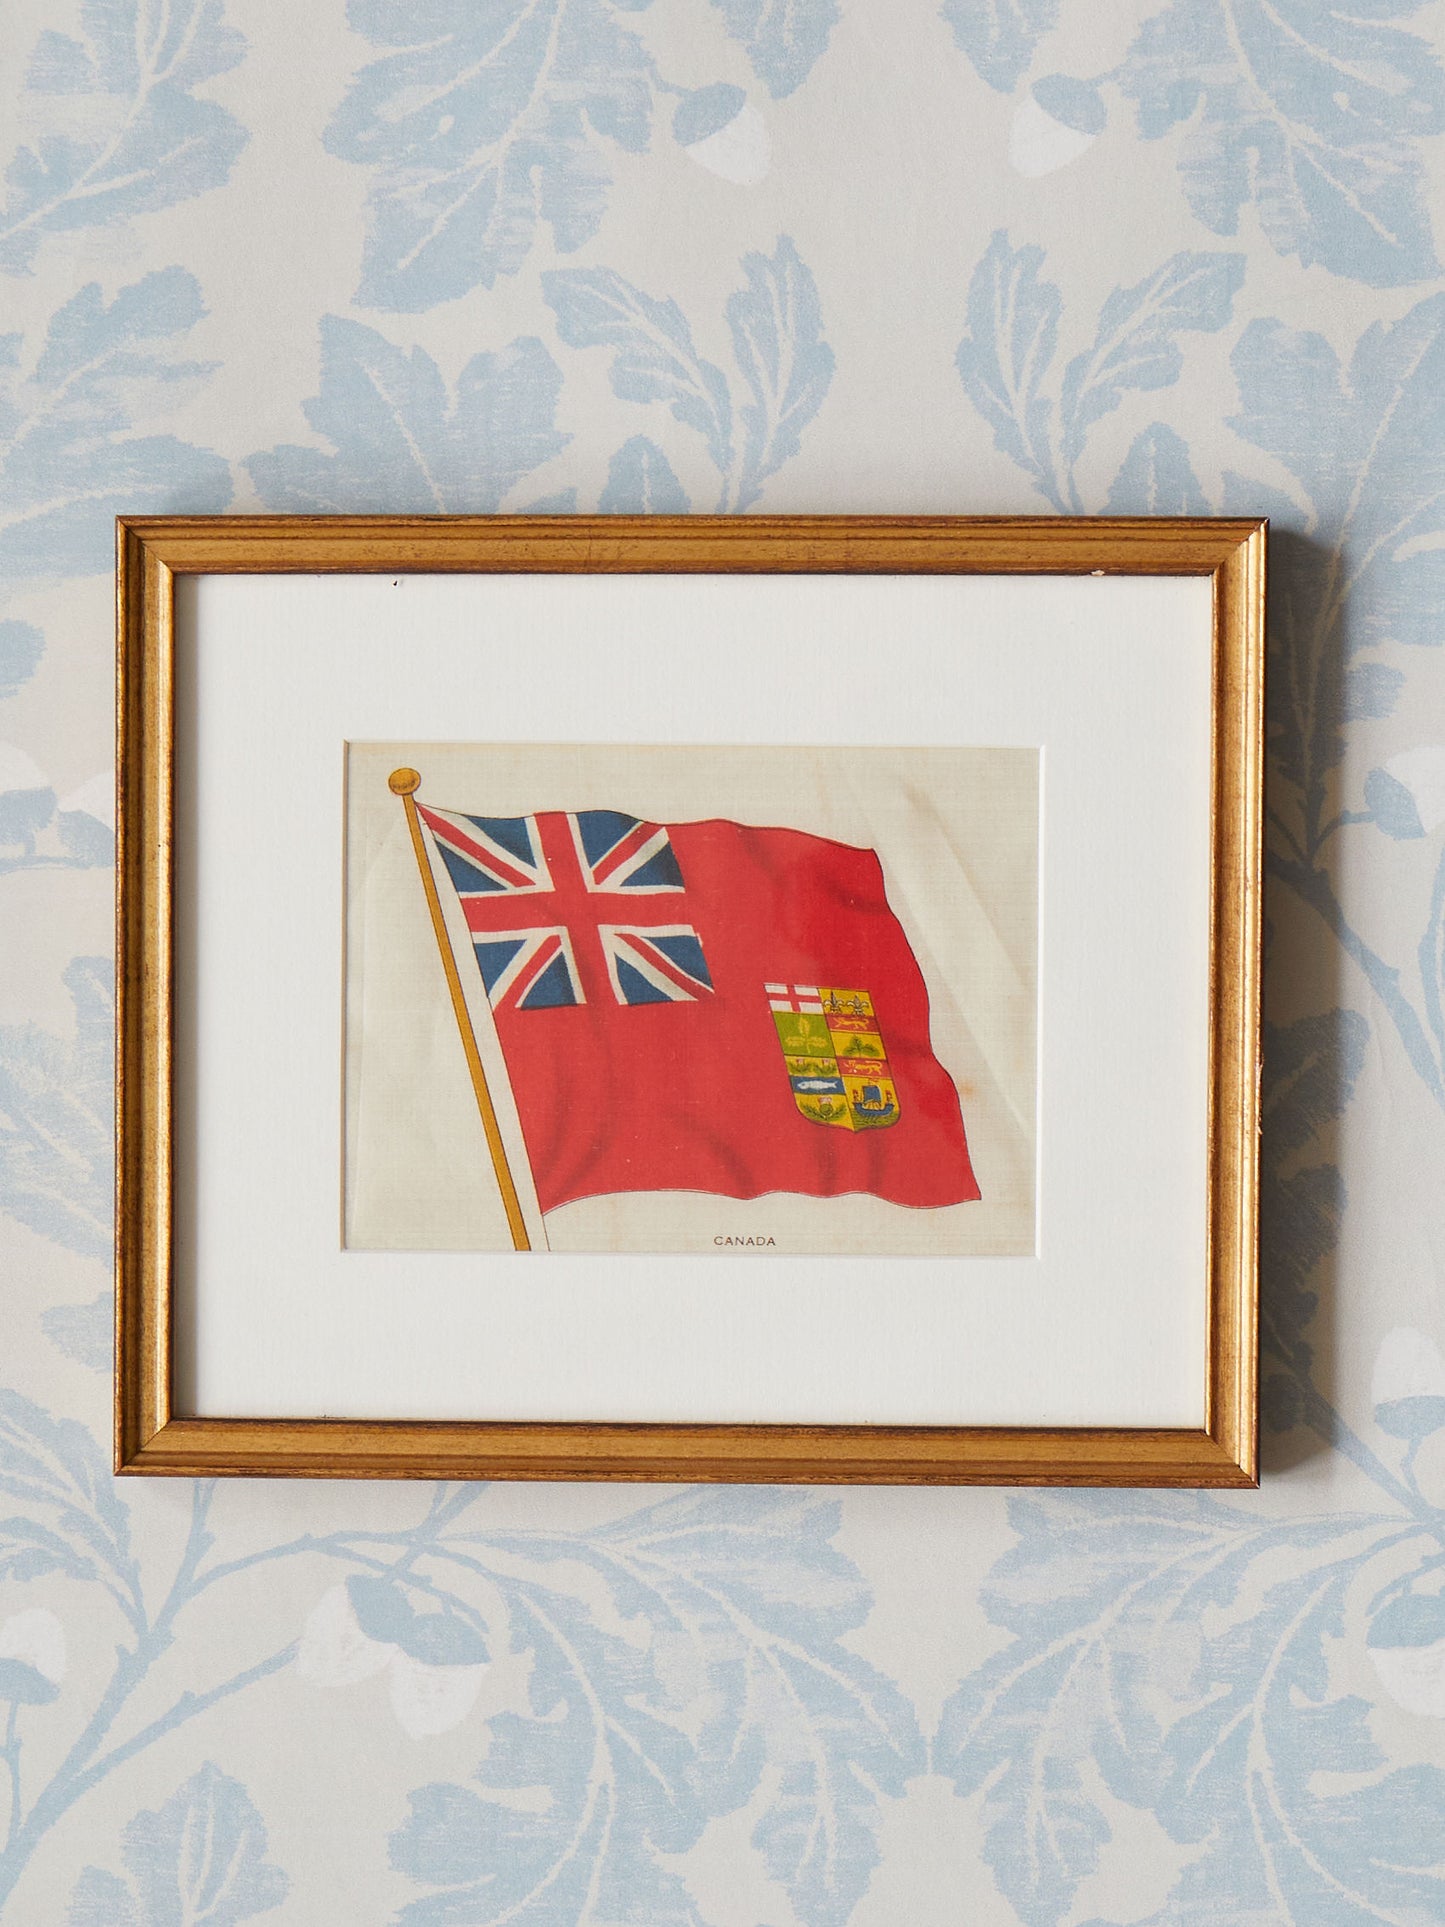 An Early 20th Century Handpainted Silk Flag of Canada